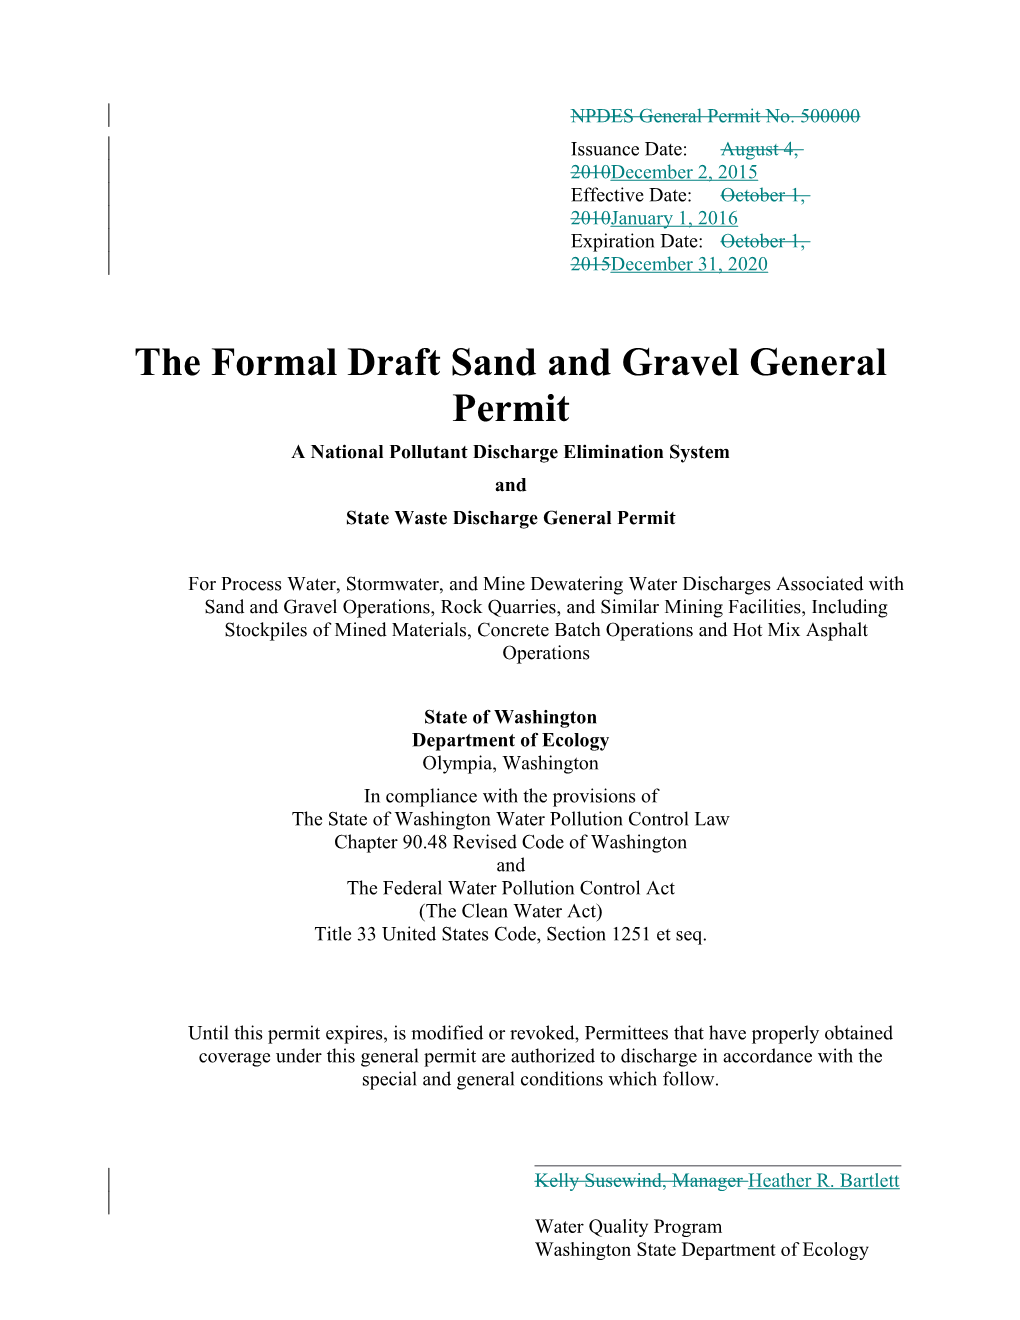 Formal Draft of the Sand & Gravel General Permit s1